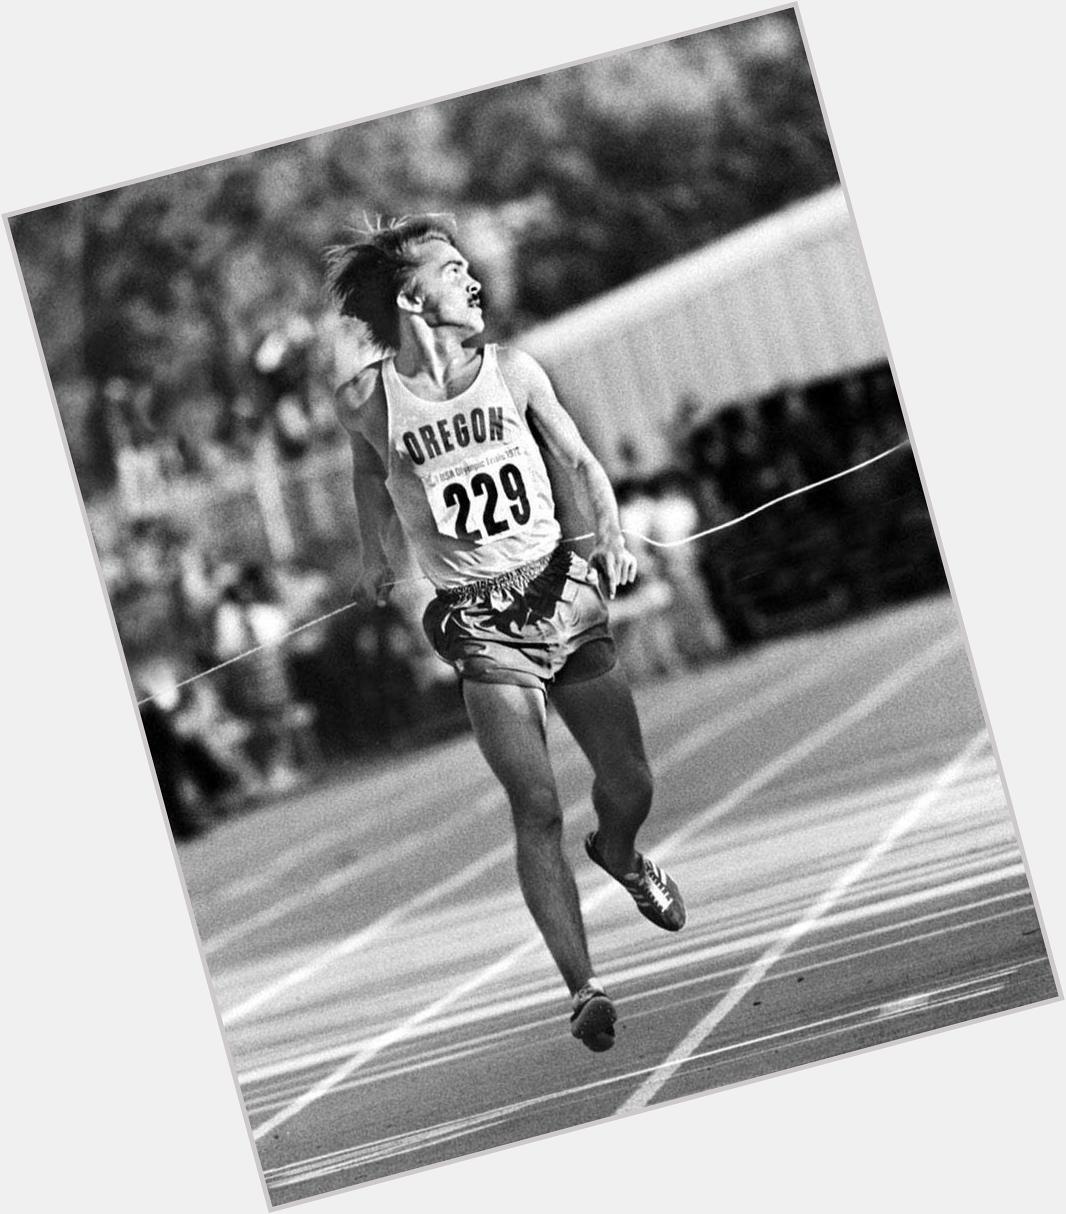 Happy birthday to the greatest runner to ever live, American hero Steve Prefontaine. Would\ve been 64 today 